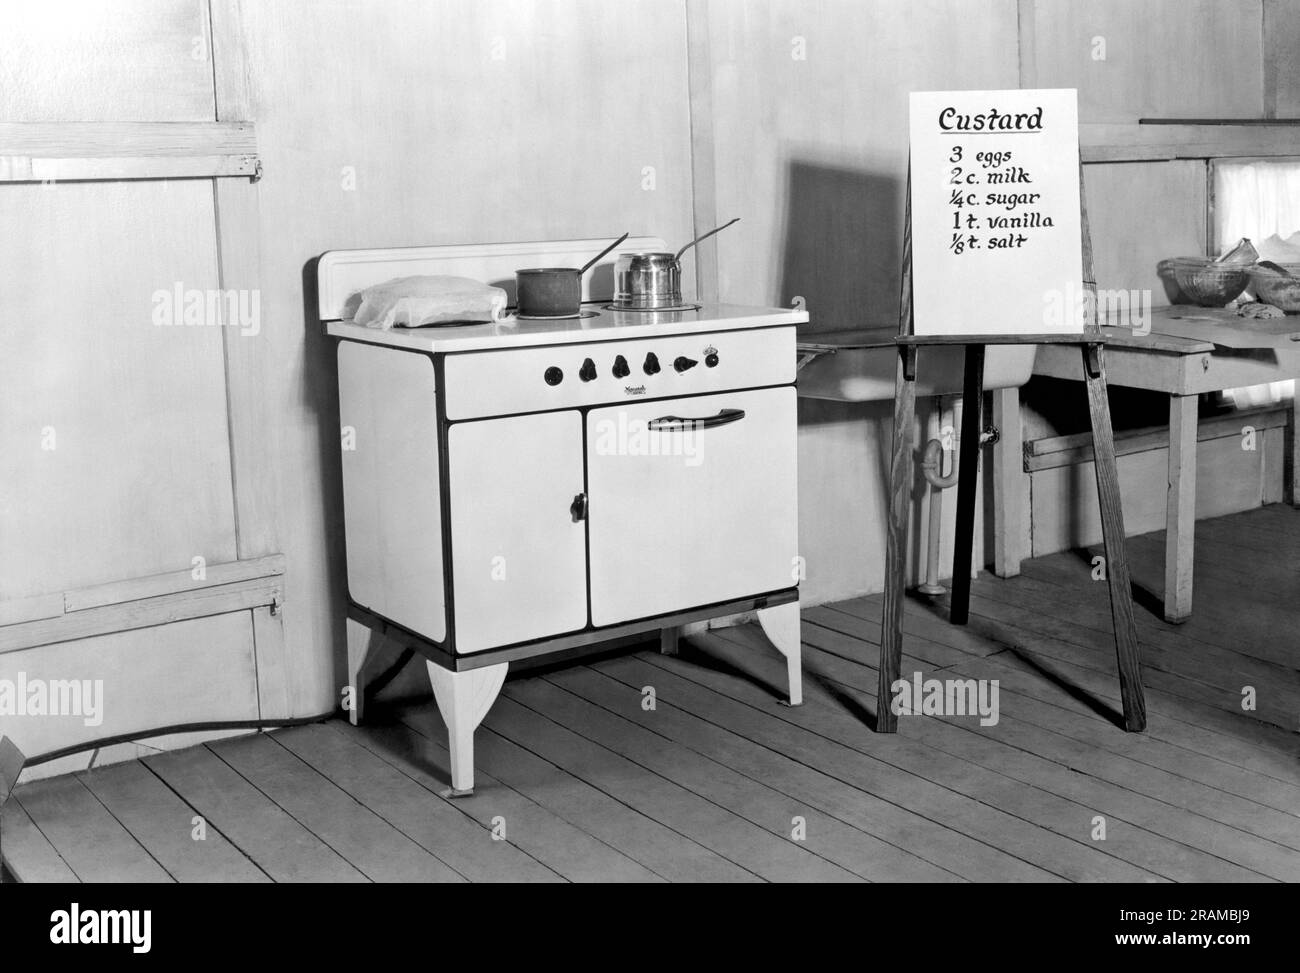 United States:  c. 1925. A stove in a kitchen with a recipe for custard mounted on an easel. Stock Photo